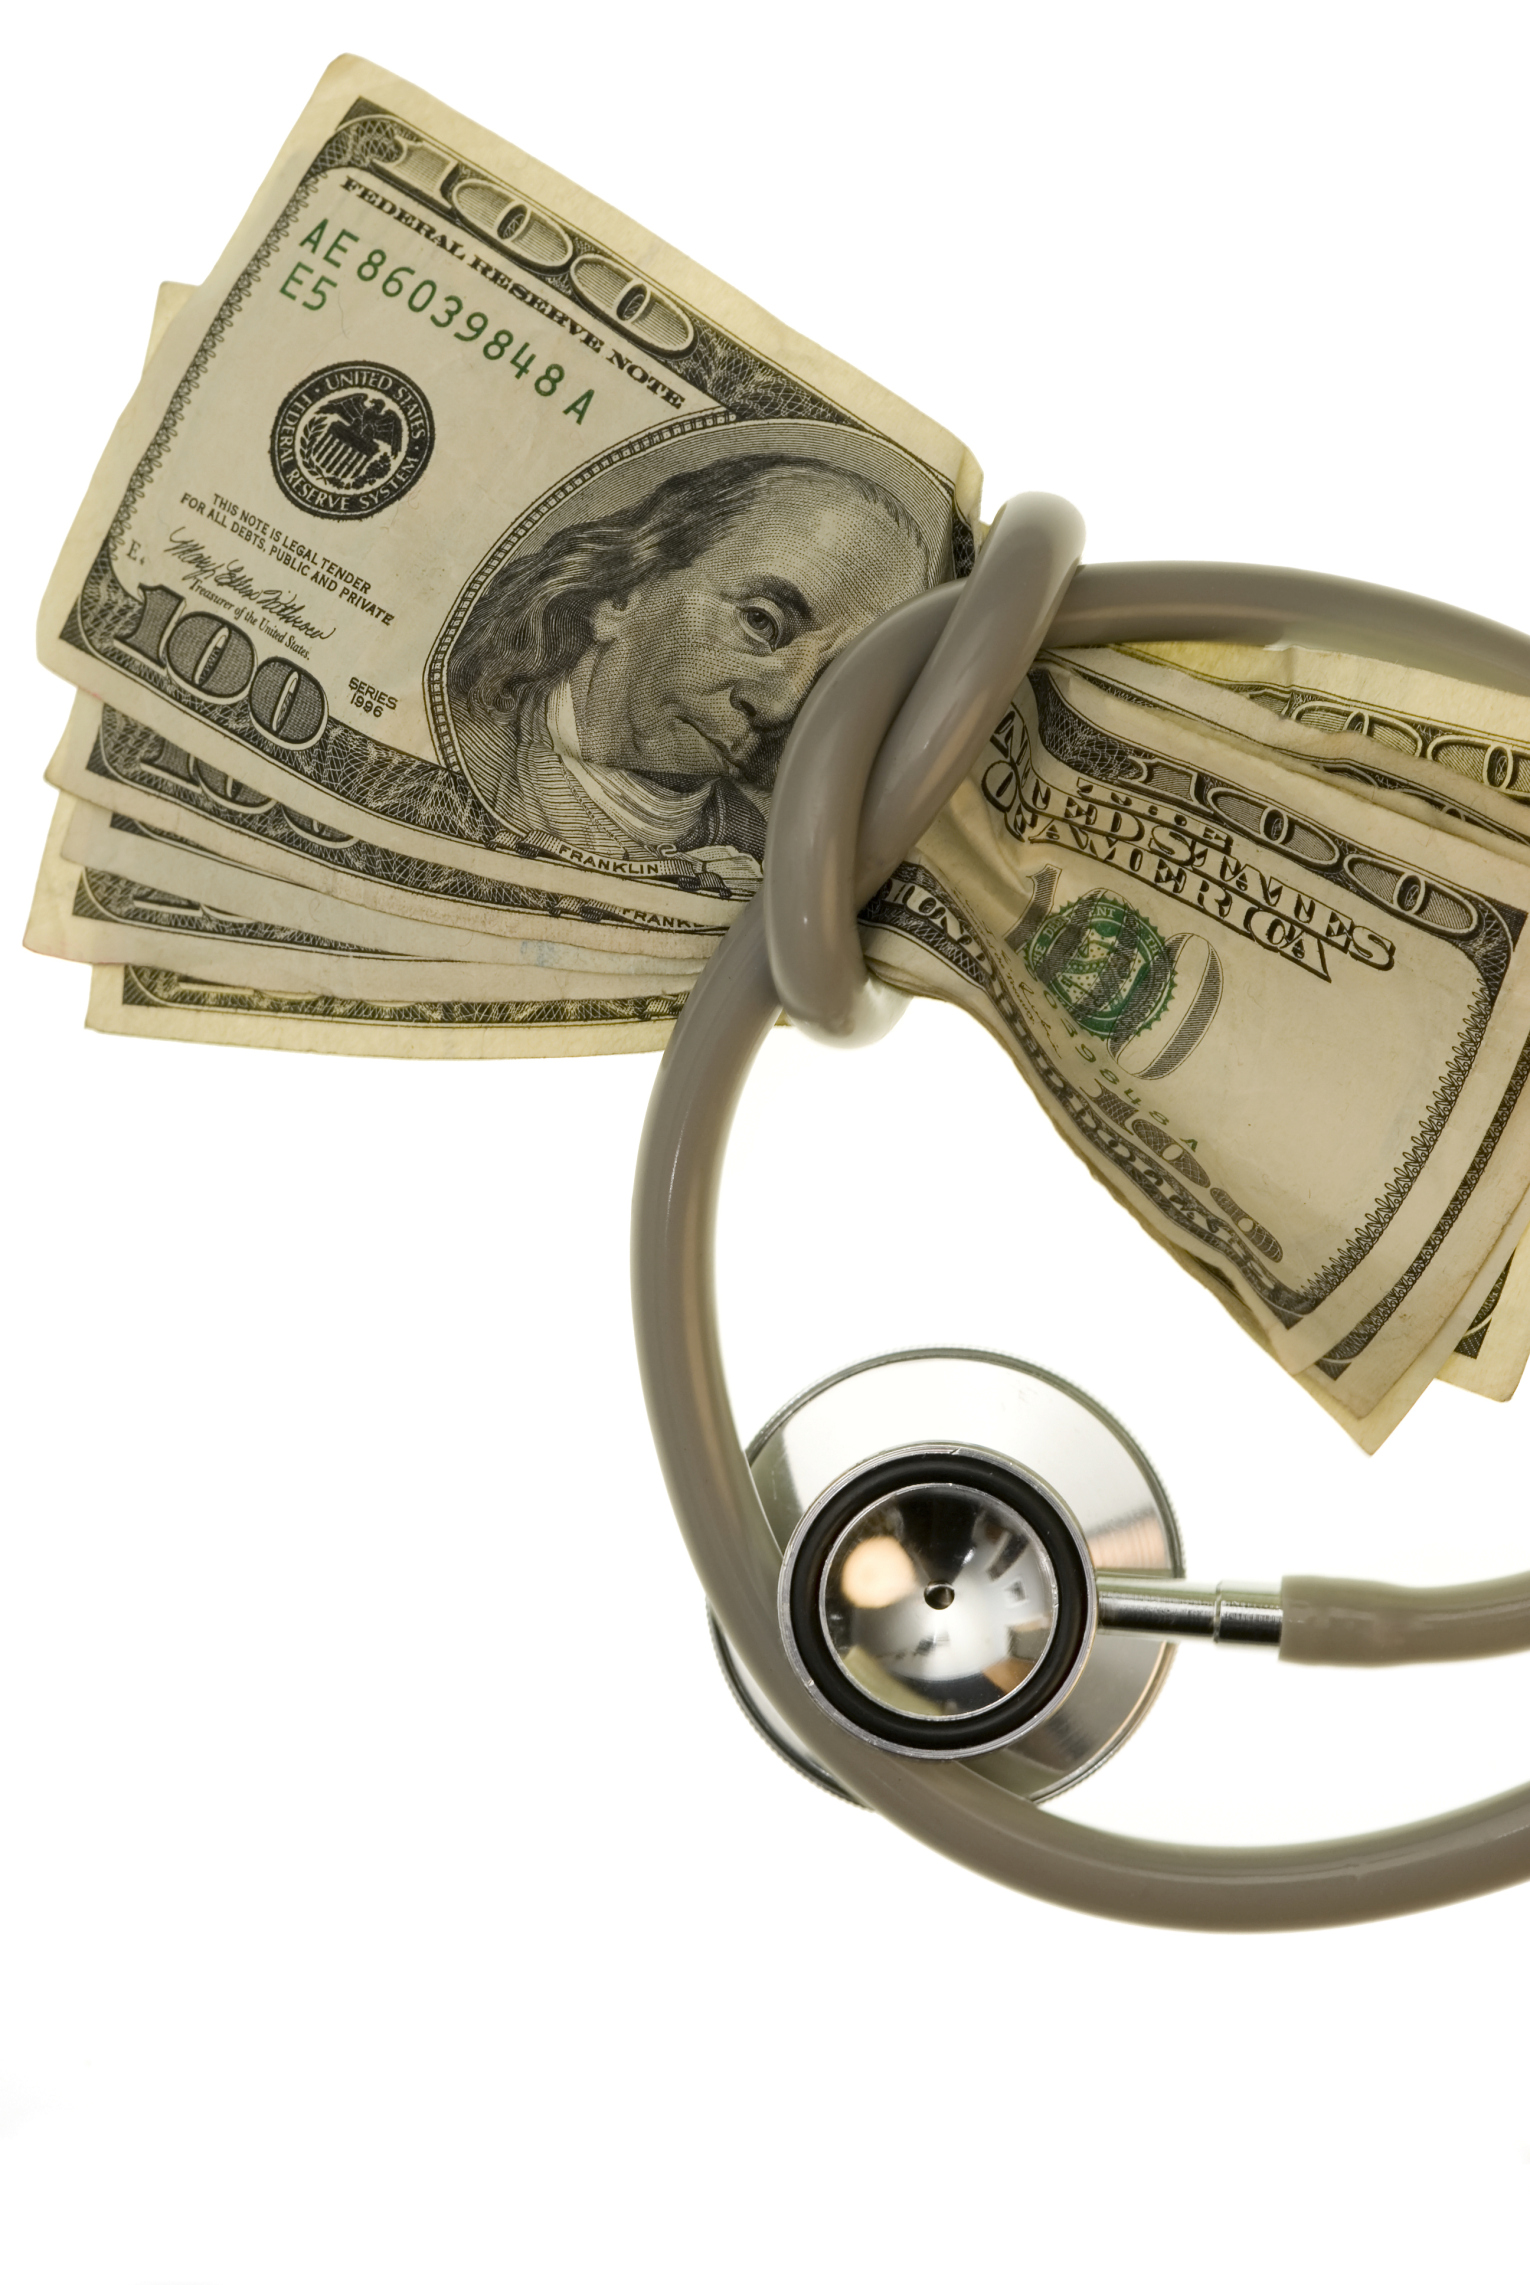 Rising Healthcare Cost – An Unresolved Issue?